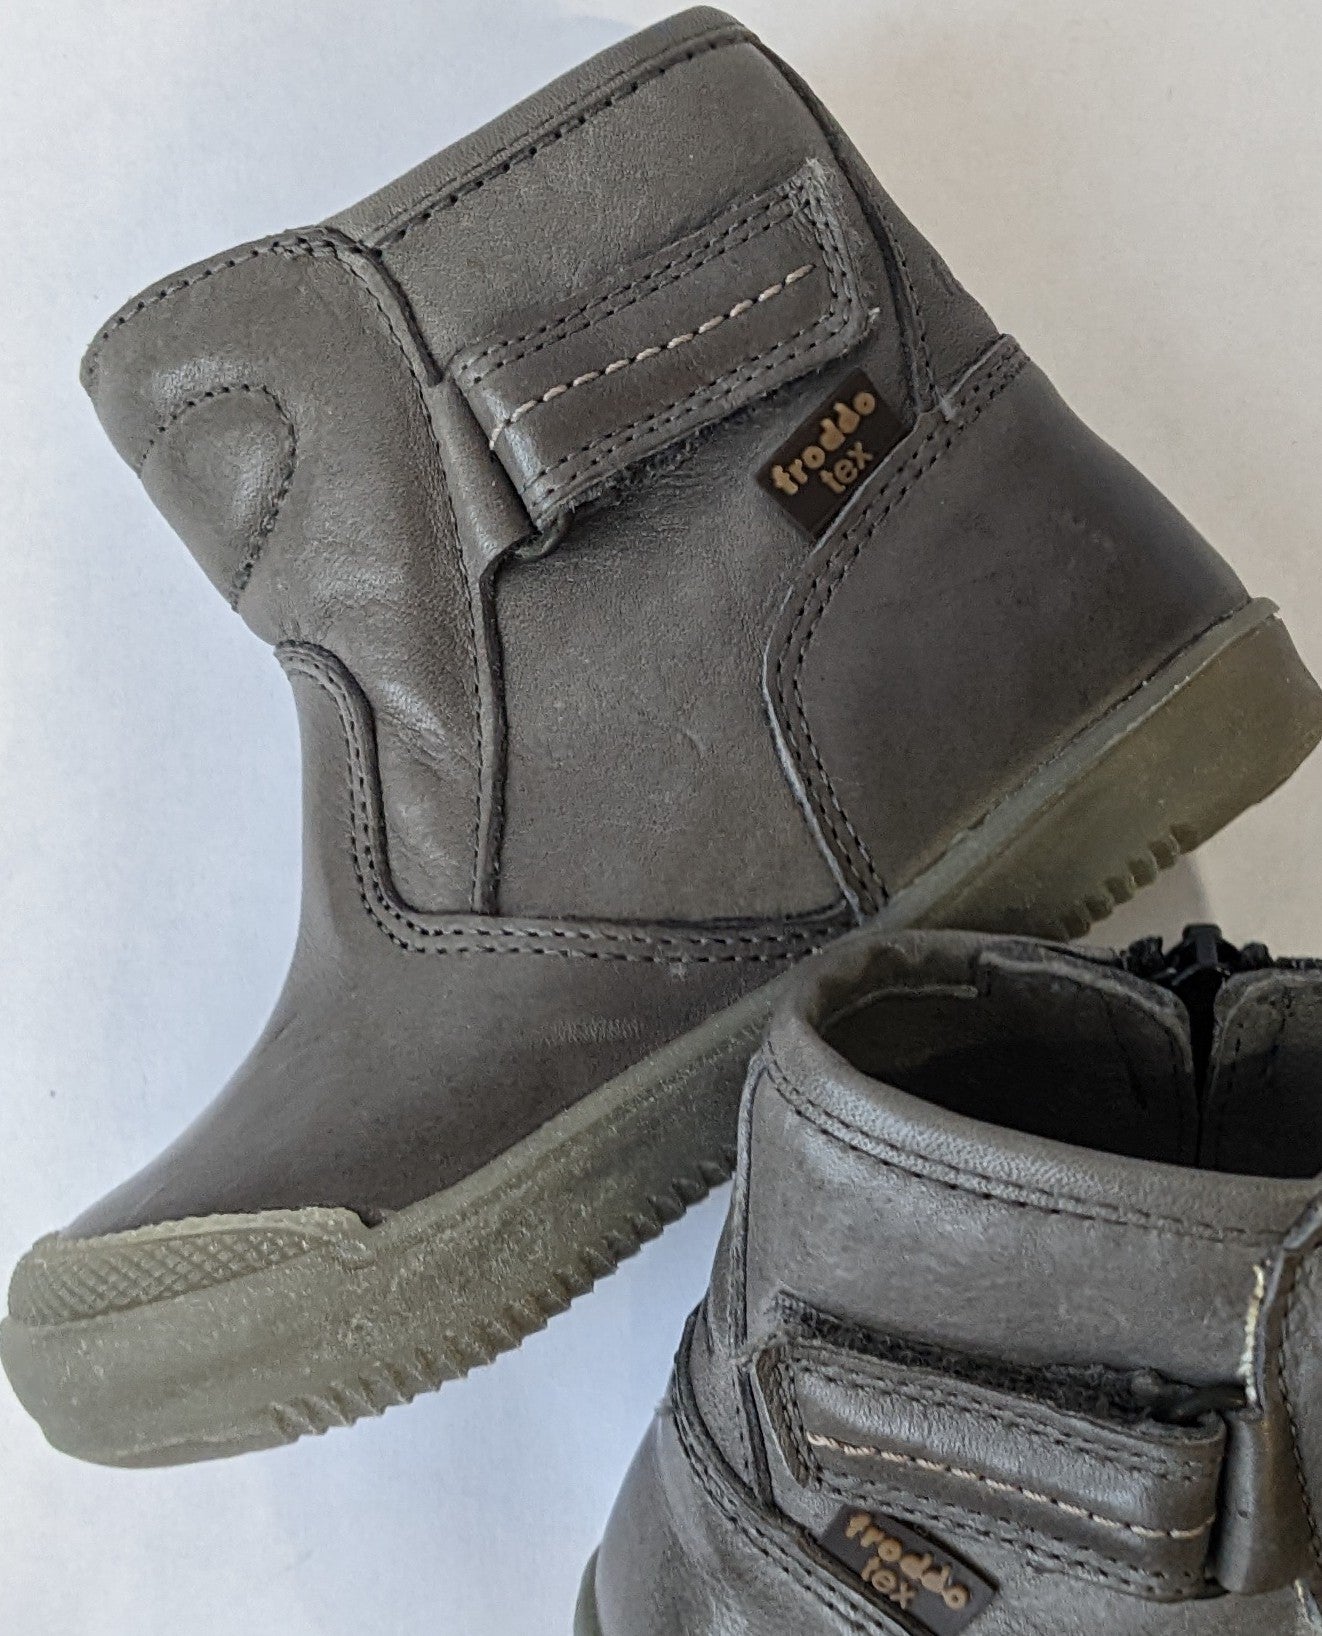 A boys waterproof ankle boot by Froddo, style G2160034-1 , in grey leather with toe bumper. Angled view of pair.